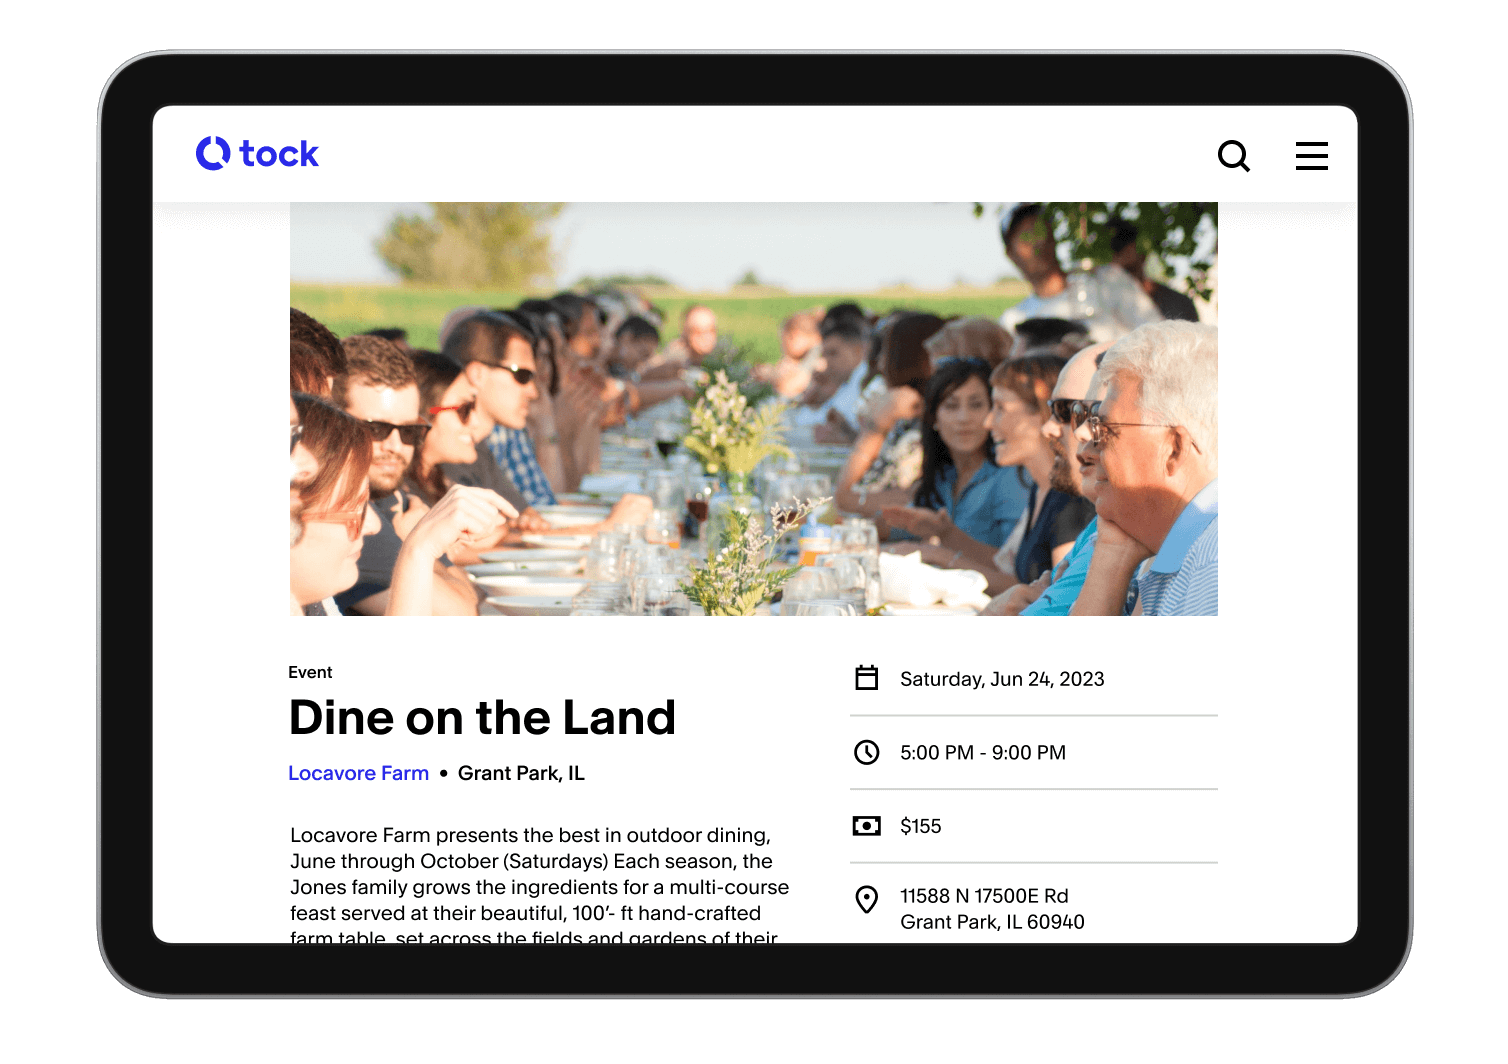 A tablet view showing an event from Locavore Farm on Tock. There is an image of rows of people surrounding a long table outdoors in the sunlight. The event is called “Dine on the Land” and there are details to the right showing the event date of Saturday, June 24th, 2023, the event time of 5:00 PM - 9:00 PM, a ticket price of $155, and the event location.